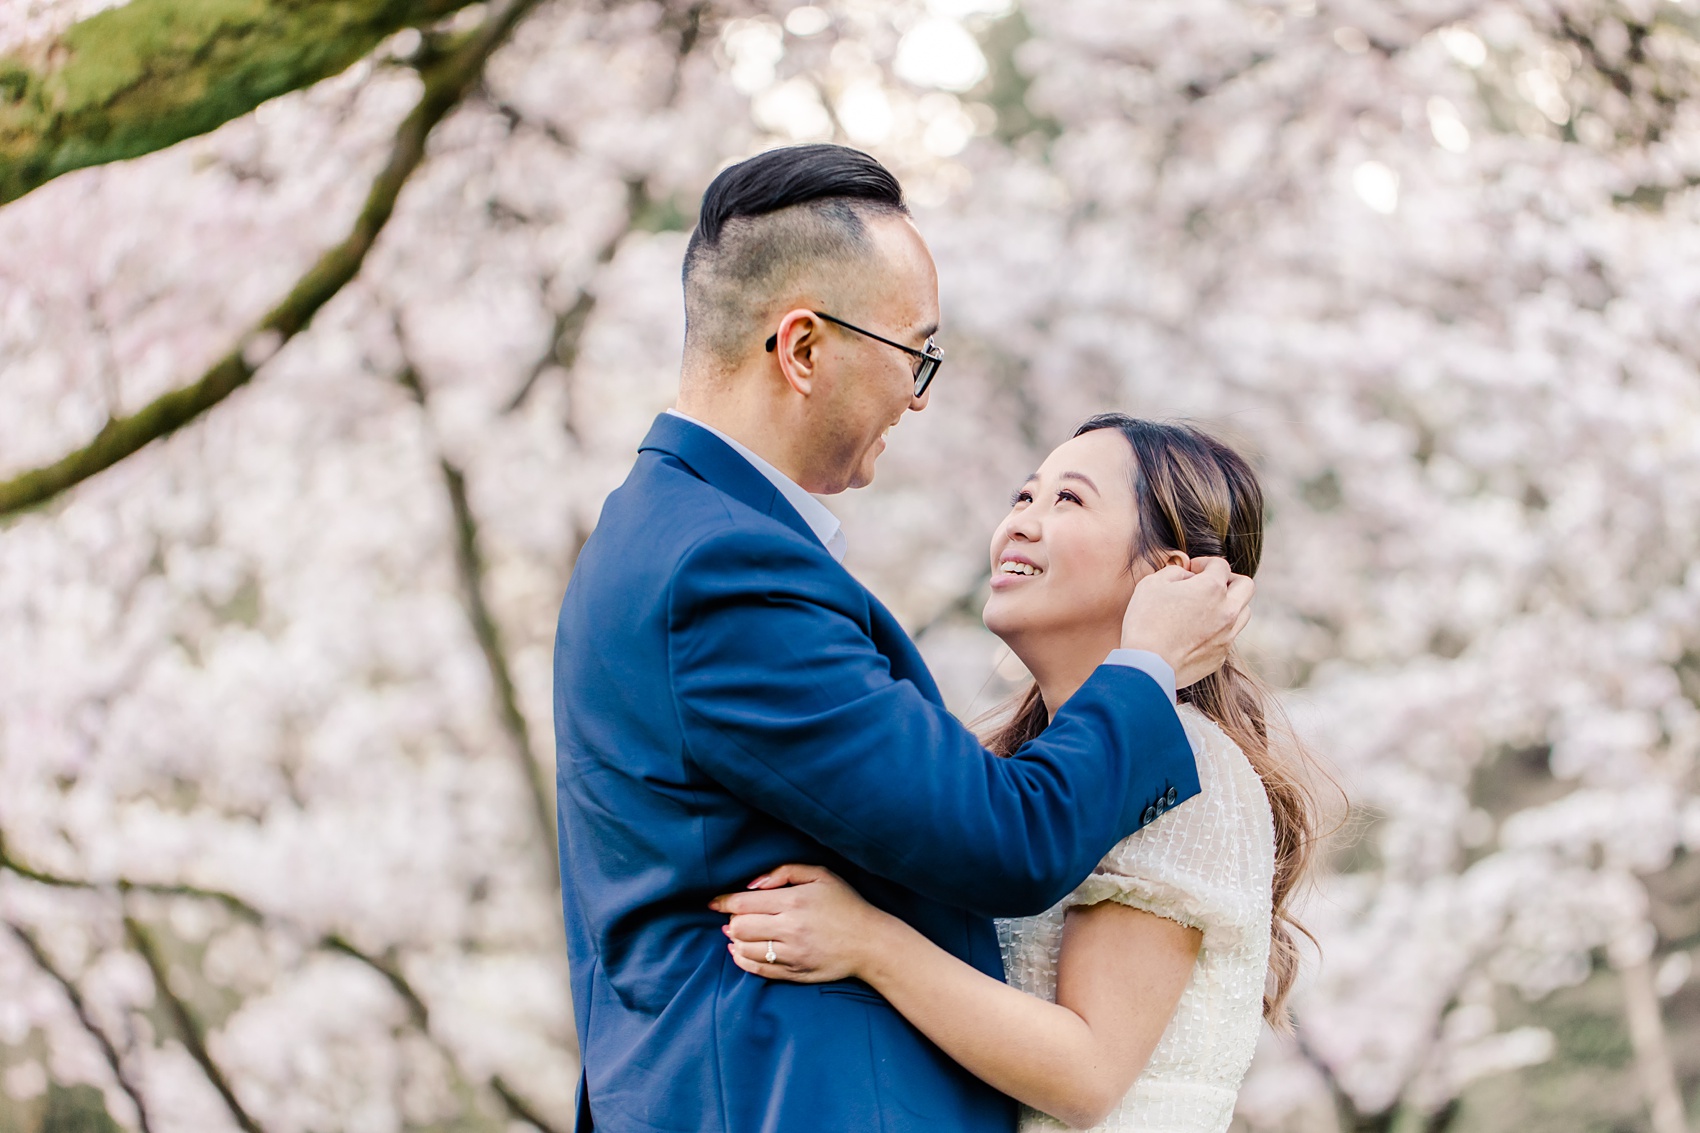 Stanley Park Cherry Blossoms engagement photo in Vancouver, BC, groom and bride looking at each other lovingly